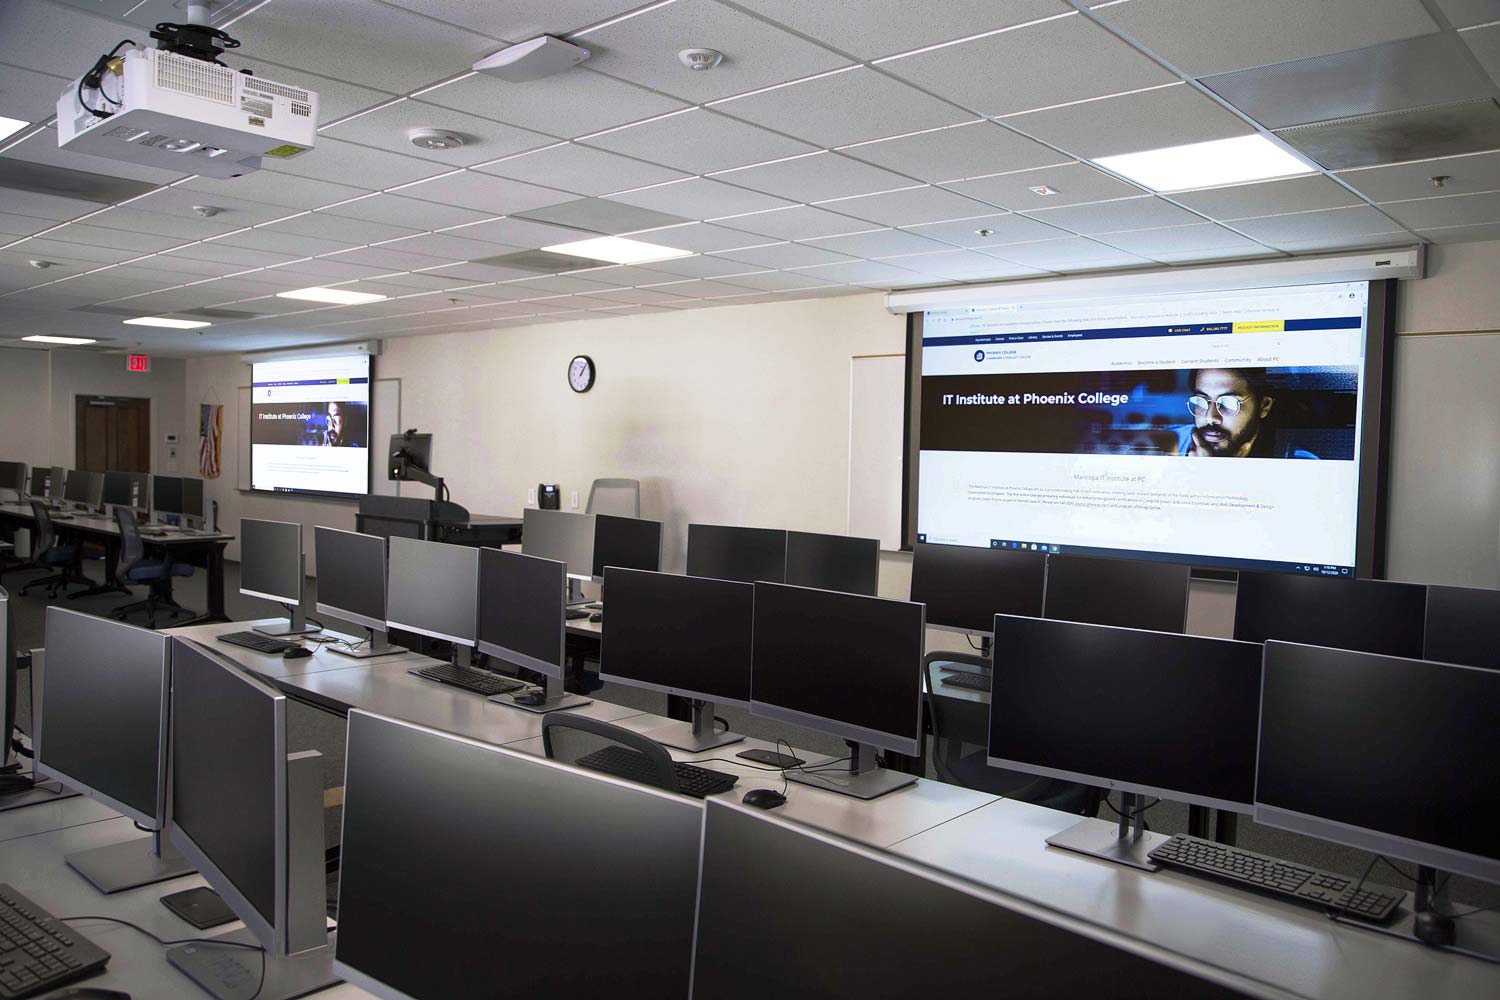 Two-projector classroom. There are also smaller classrooms equipped with one projector or 75” flat panel displays.